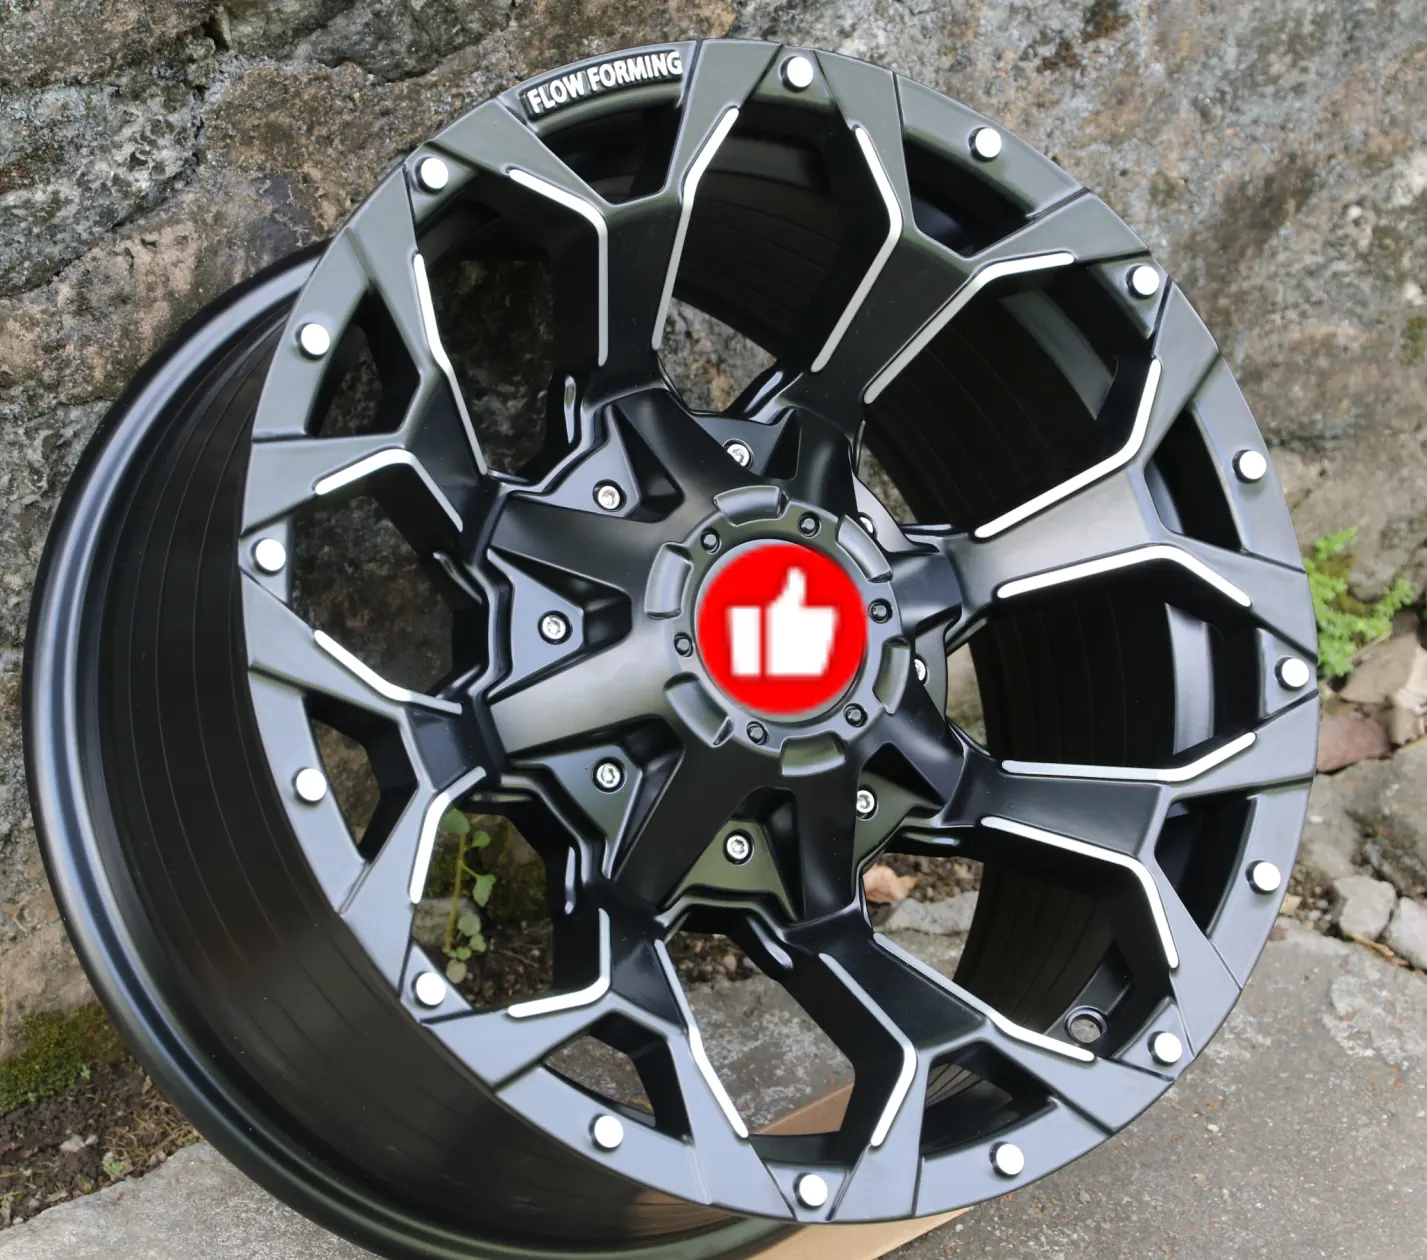 Chinese Alloy Wheel For car Car In 17 Inch 18 Inch 6X139.7 Offroad 4X4 Suv Sport Rims For Landcruiser Hilux Prado